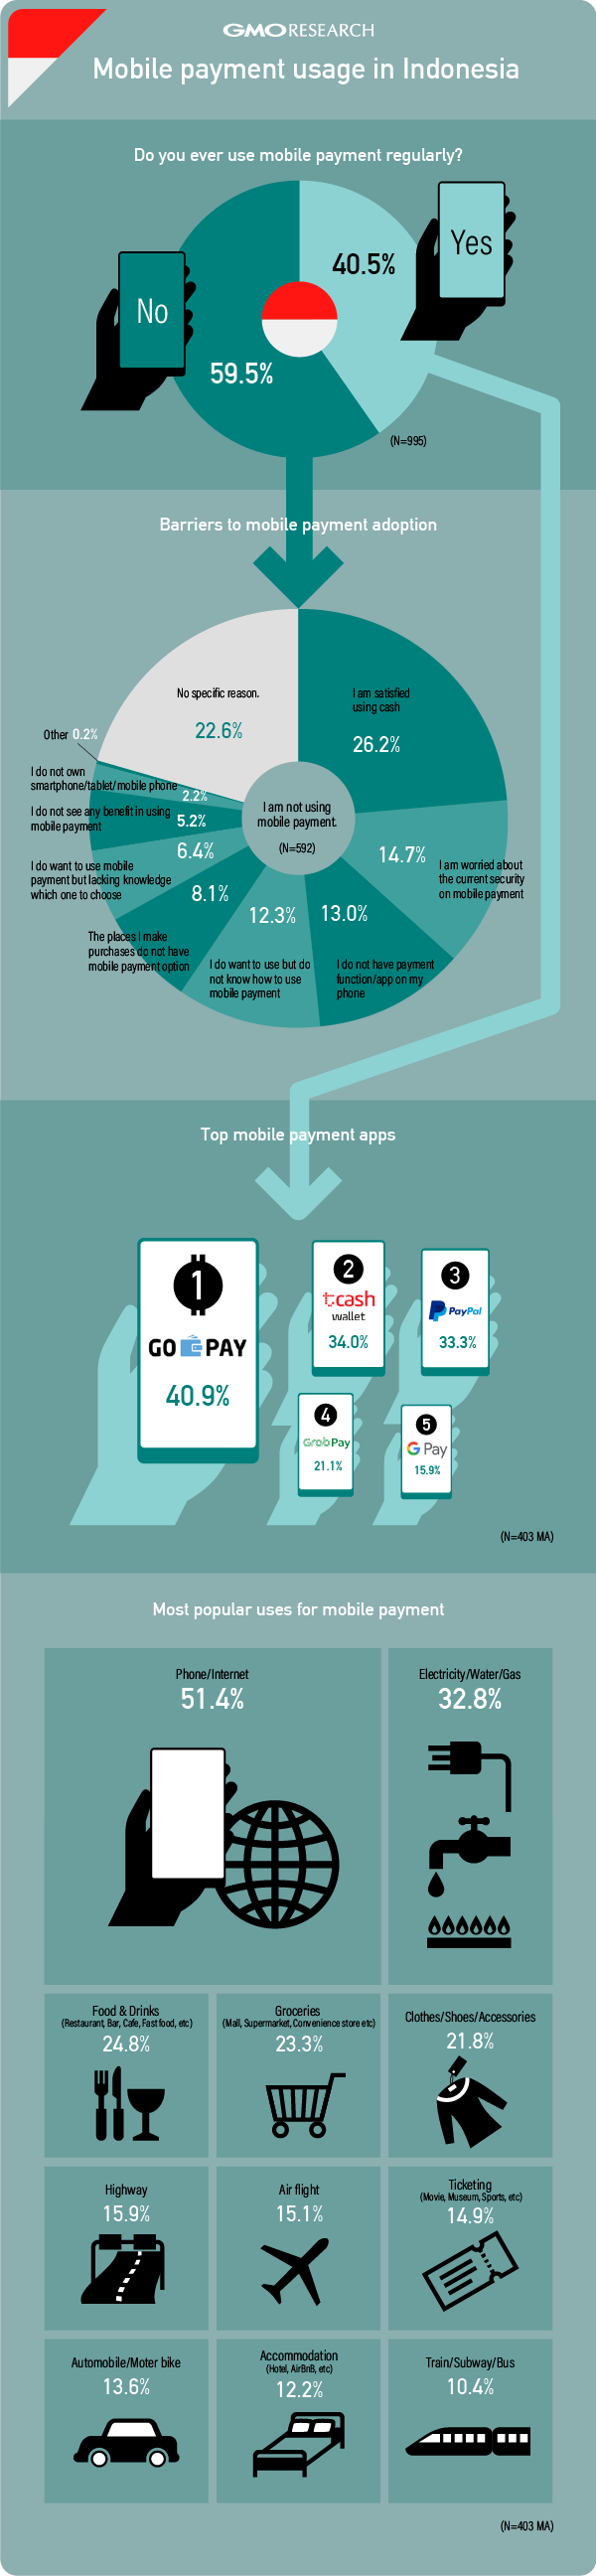 Mobile Payment Usage in Indonesia